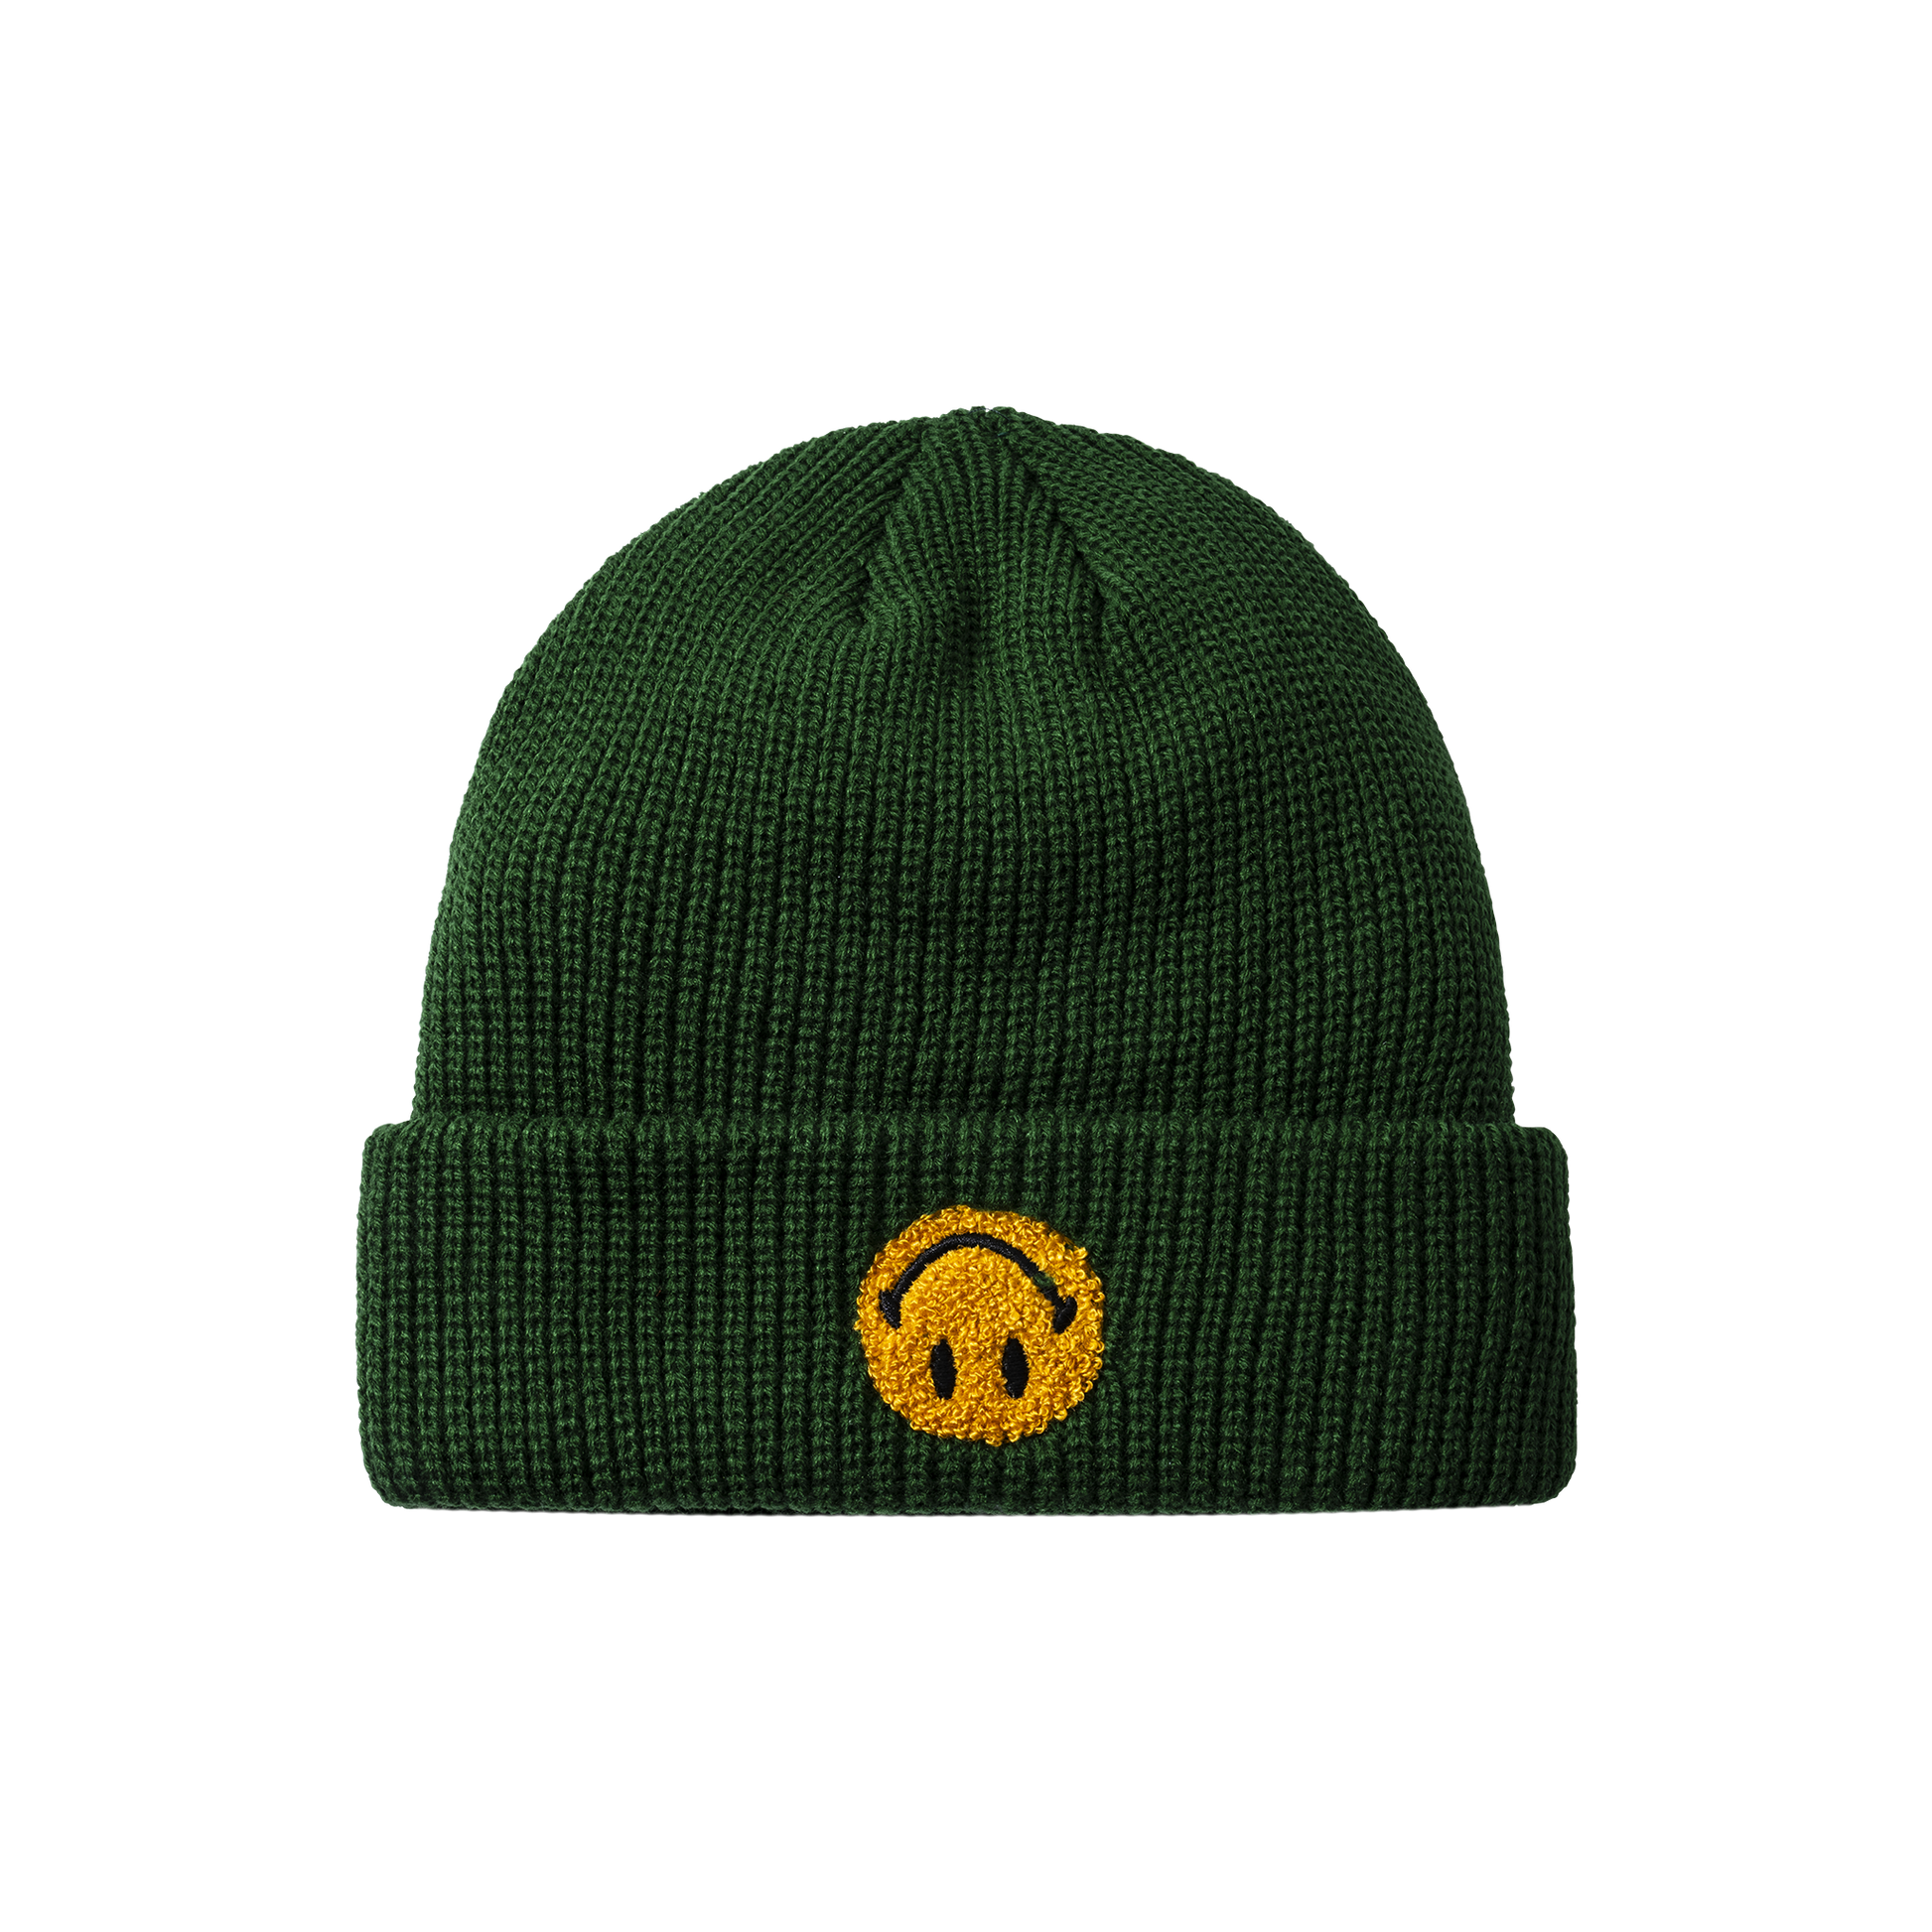 MARKET clothing brand SMILEY UPSIDE DOWN BEANIE. Find more graphic tees, hats, beanies, hoodies at MarketStudios.com. Formally Chinatown Market. 